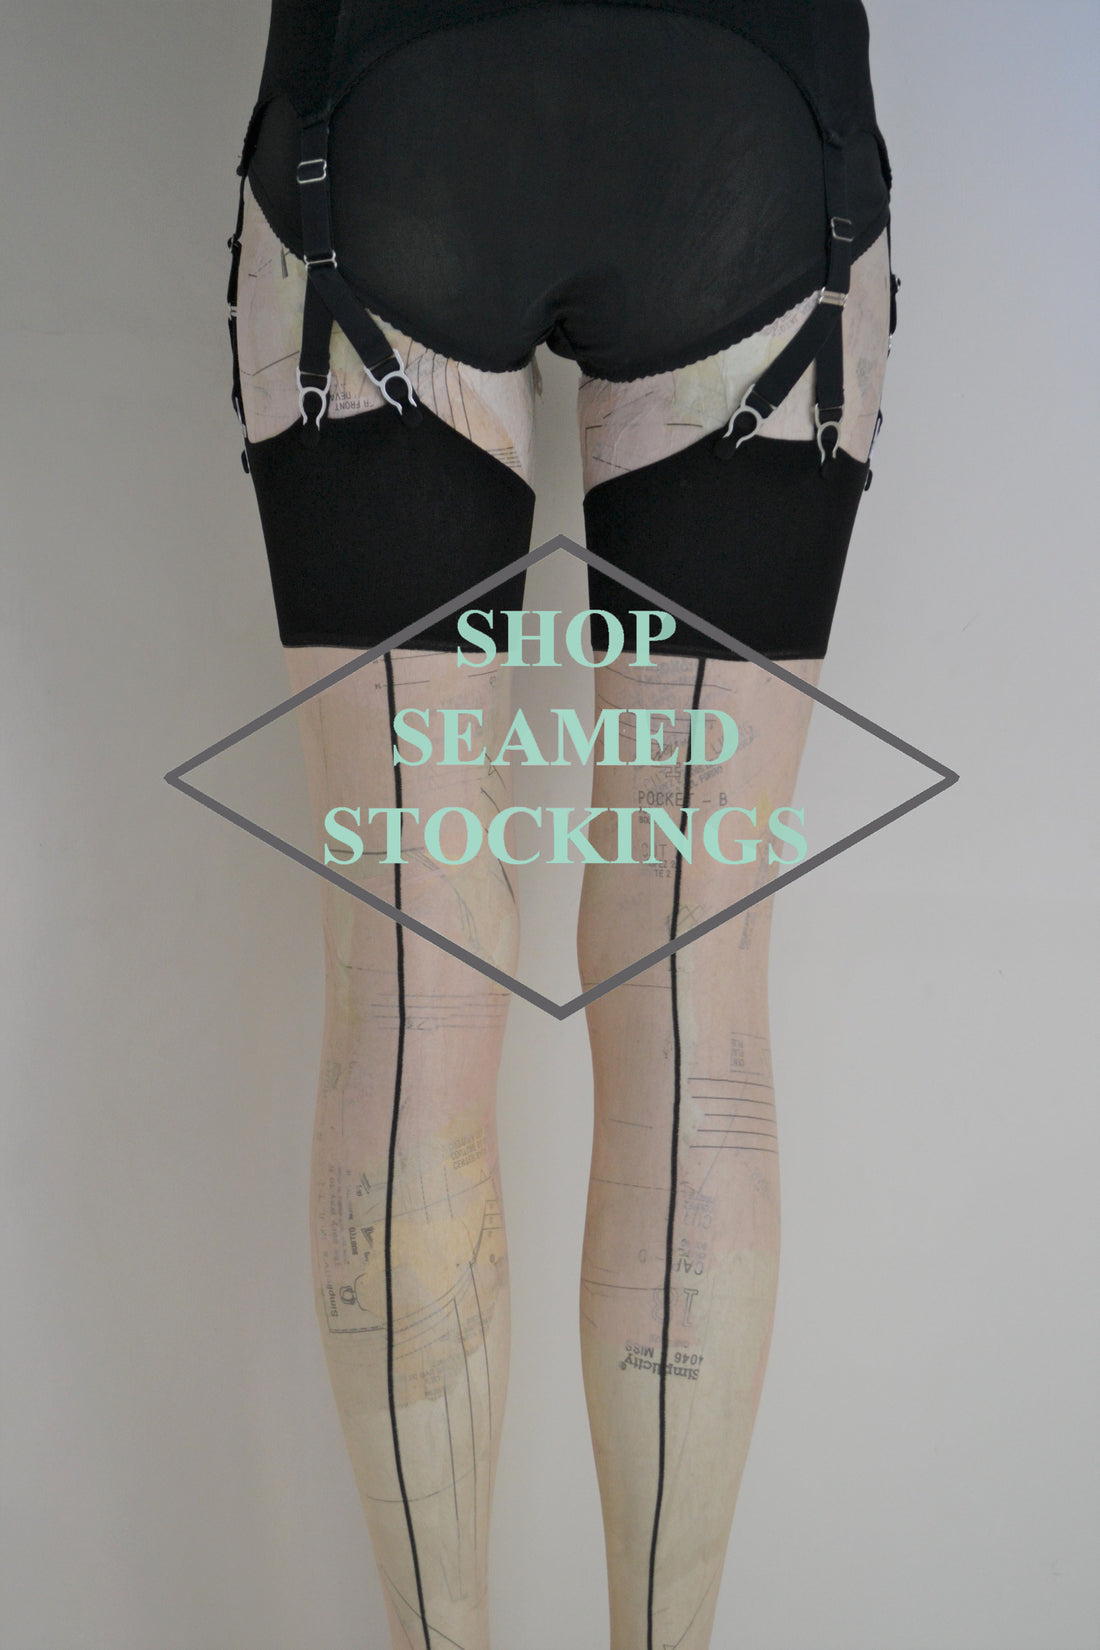 vintage style seamed nylon stockings Available in plus size by Pip & Pantalaimon retro and vintage inspired lingerie and shapewear